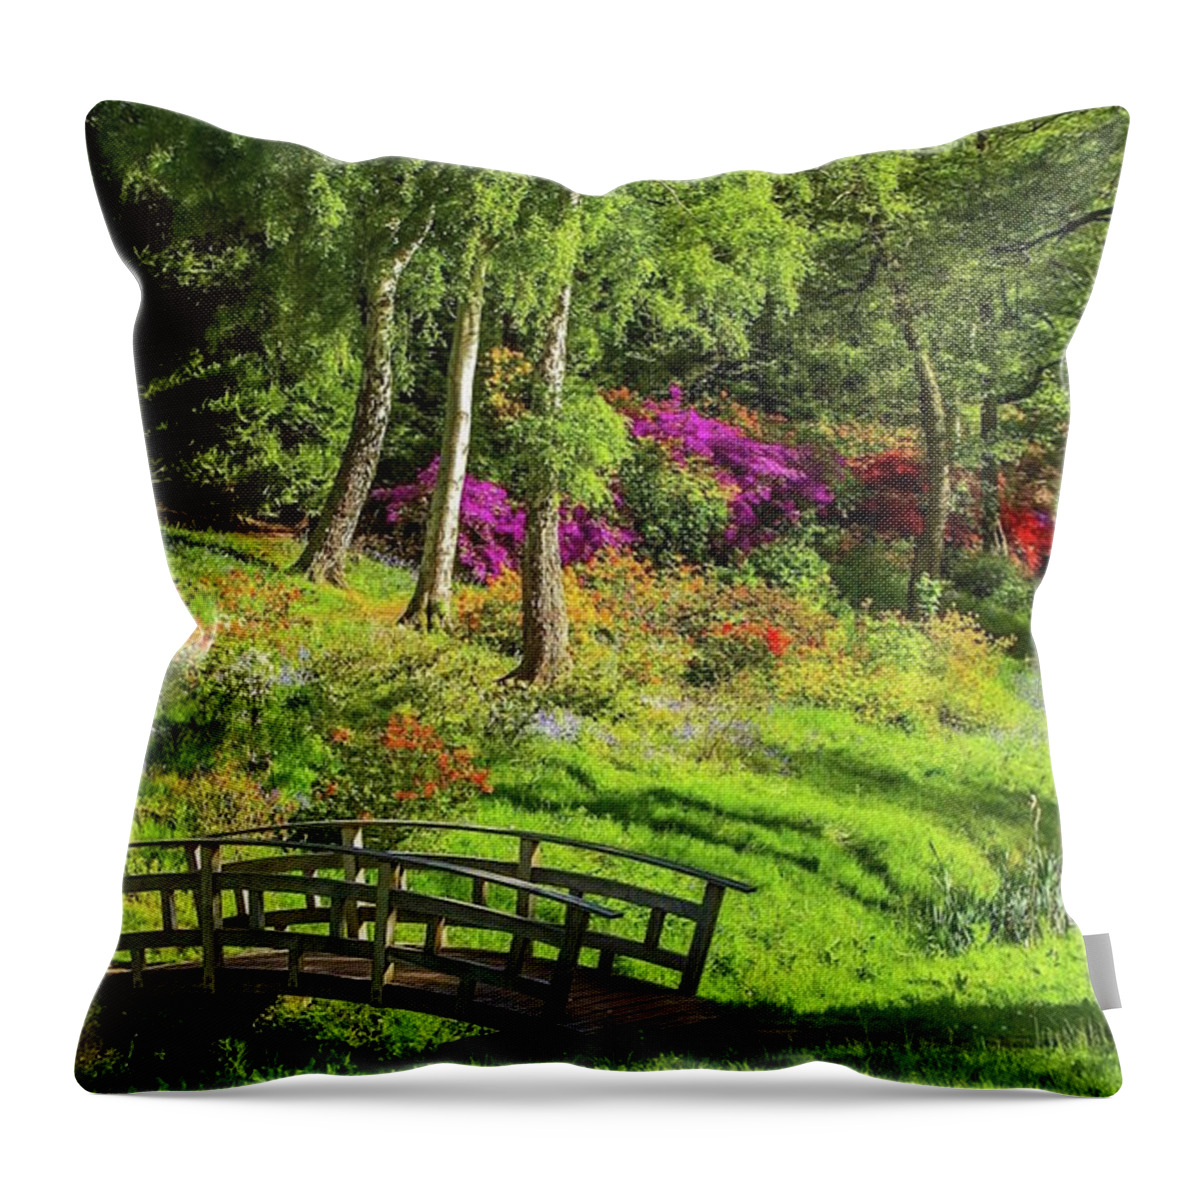 Nature Canvas Throw Pillow featuring the photograph Nature In Balance by Monique Wegmueller